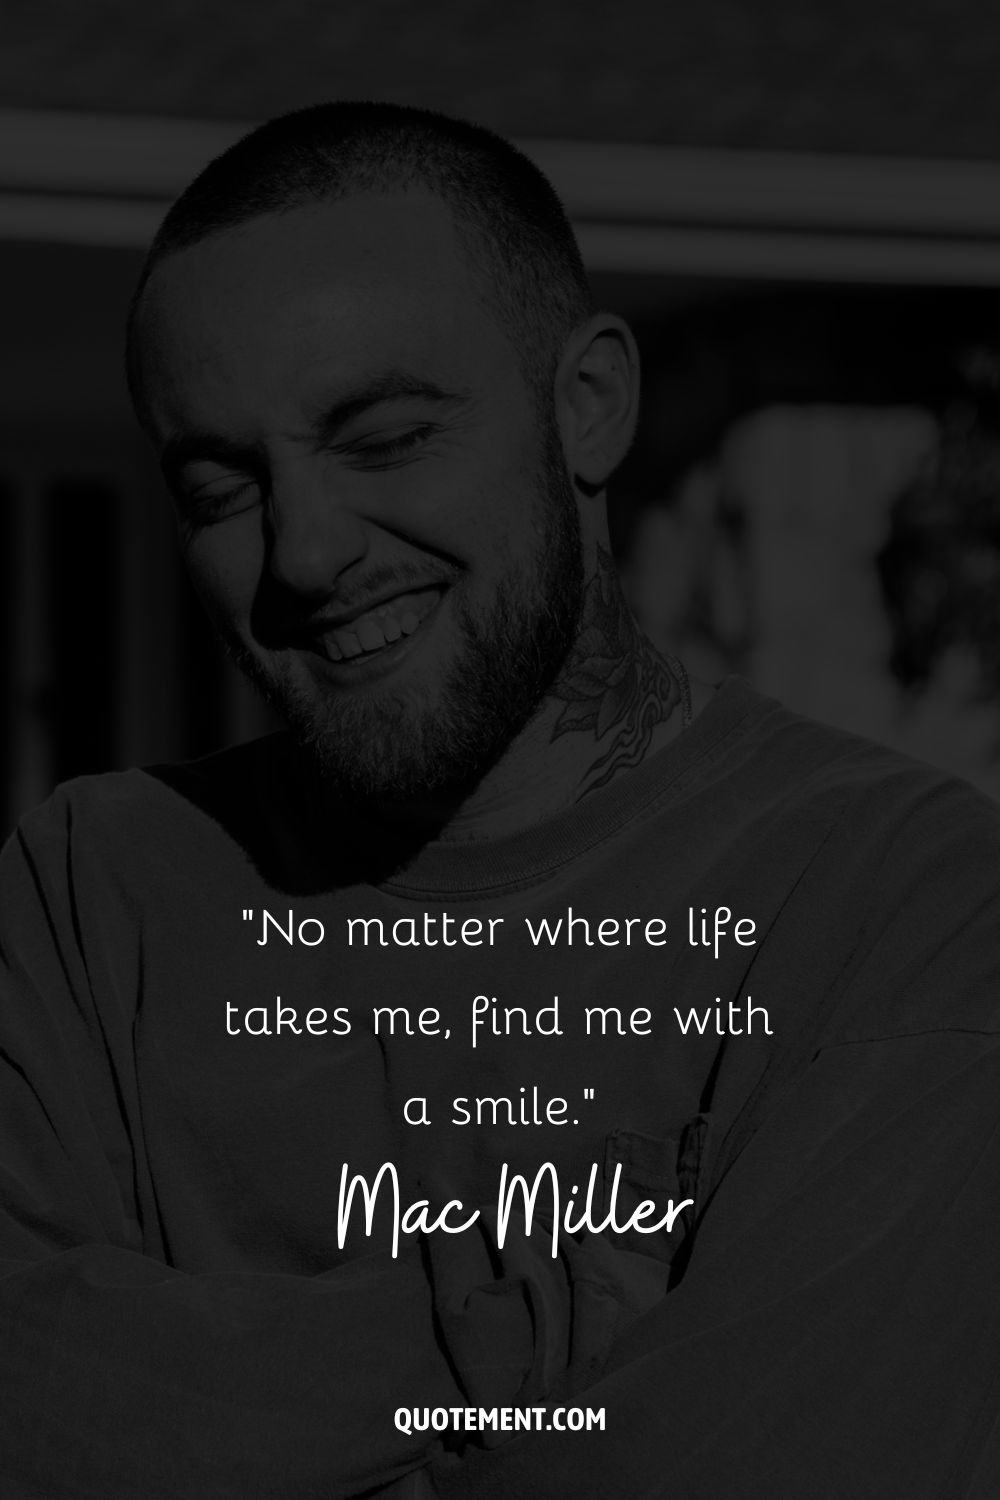 “No matter where life takes me, find me with a smile.” – Mac Miller